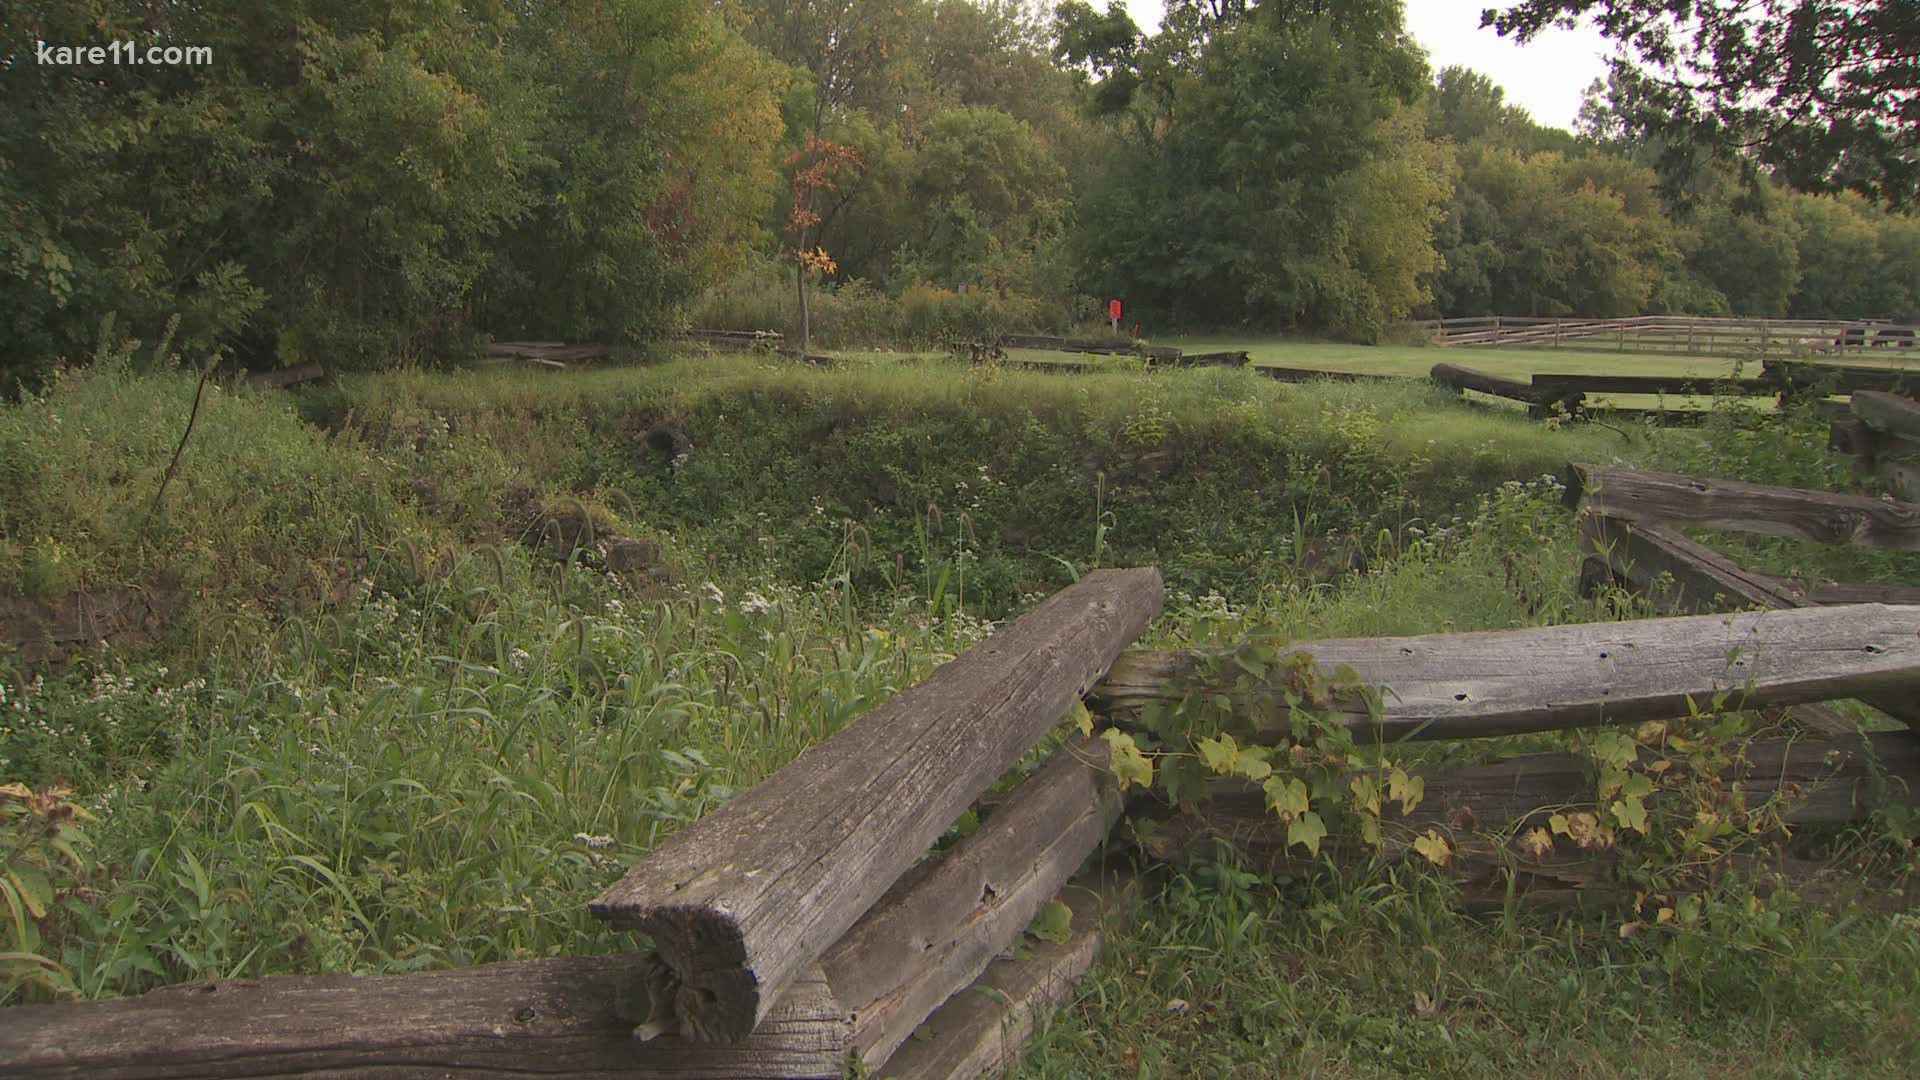 Eric Perkins shows us The Landing in Shakopee for this edition of Hitting the Trails